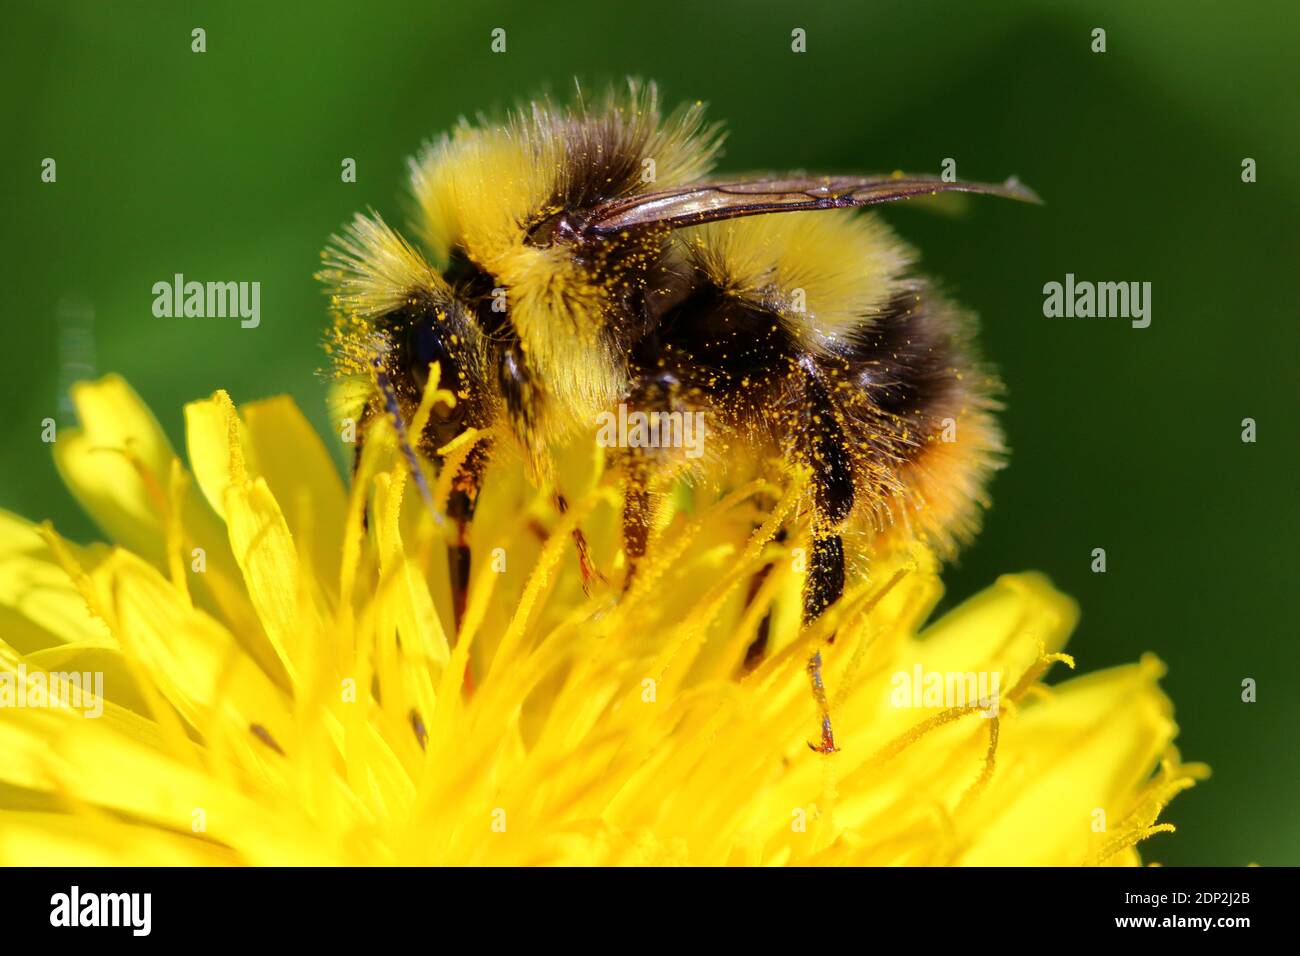 An early Bumblebee (Bombus pratorum) covered in pollen,pollinating a bright yellow dandelion (Taraxacum officinale) Stock Photo